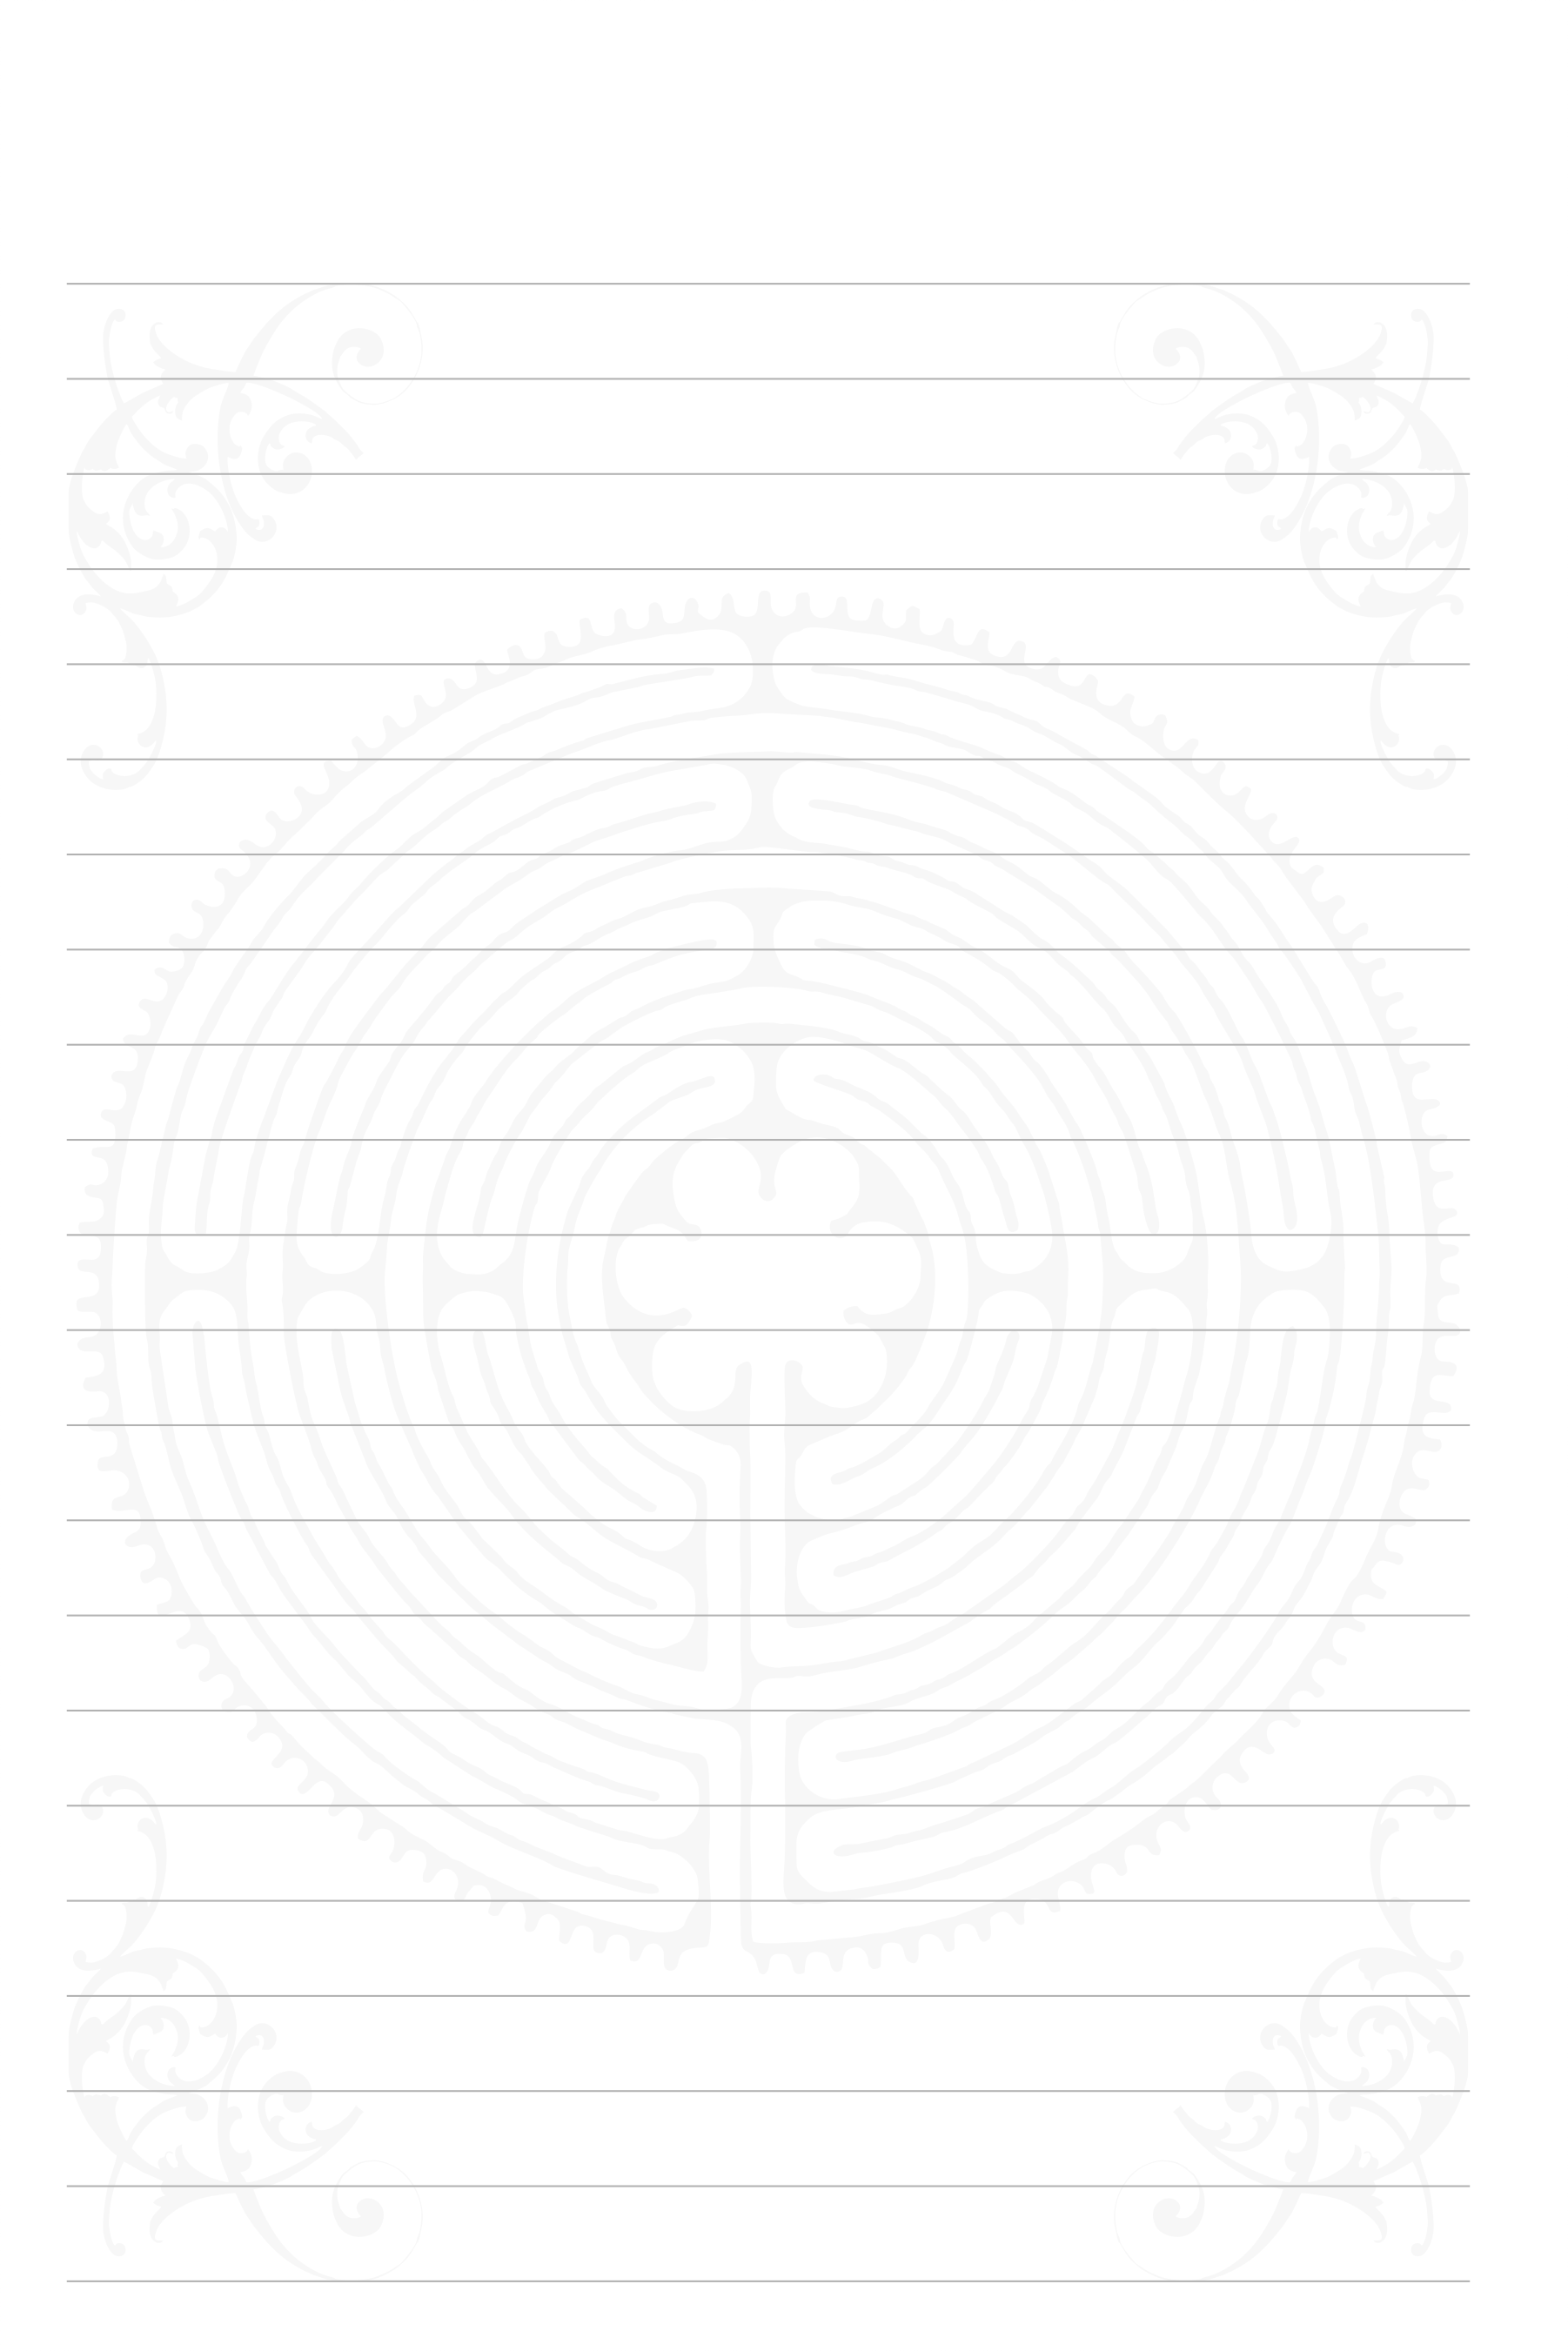 mindful tracing art, labyrinth, finger labyrinth, meditation, mindfulness, therapy, journaling, stress, anxiety, anger, PTSD, ADHD, autism, management